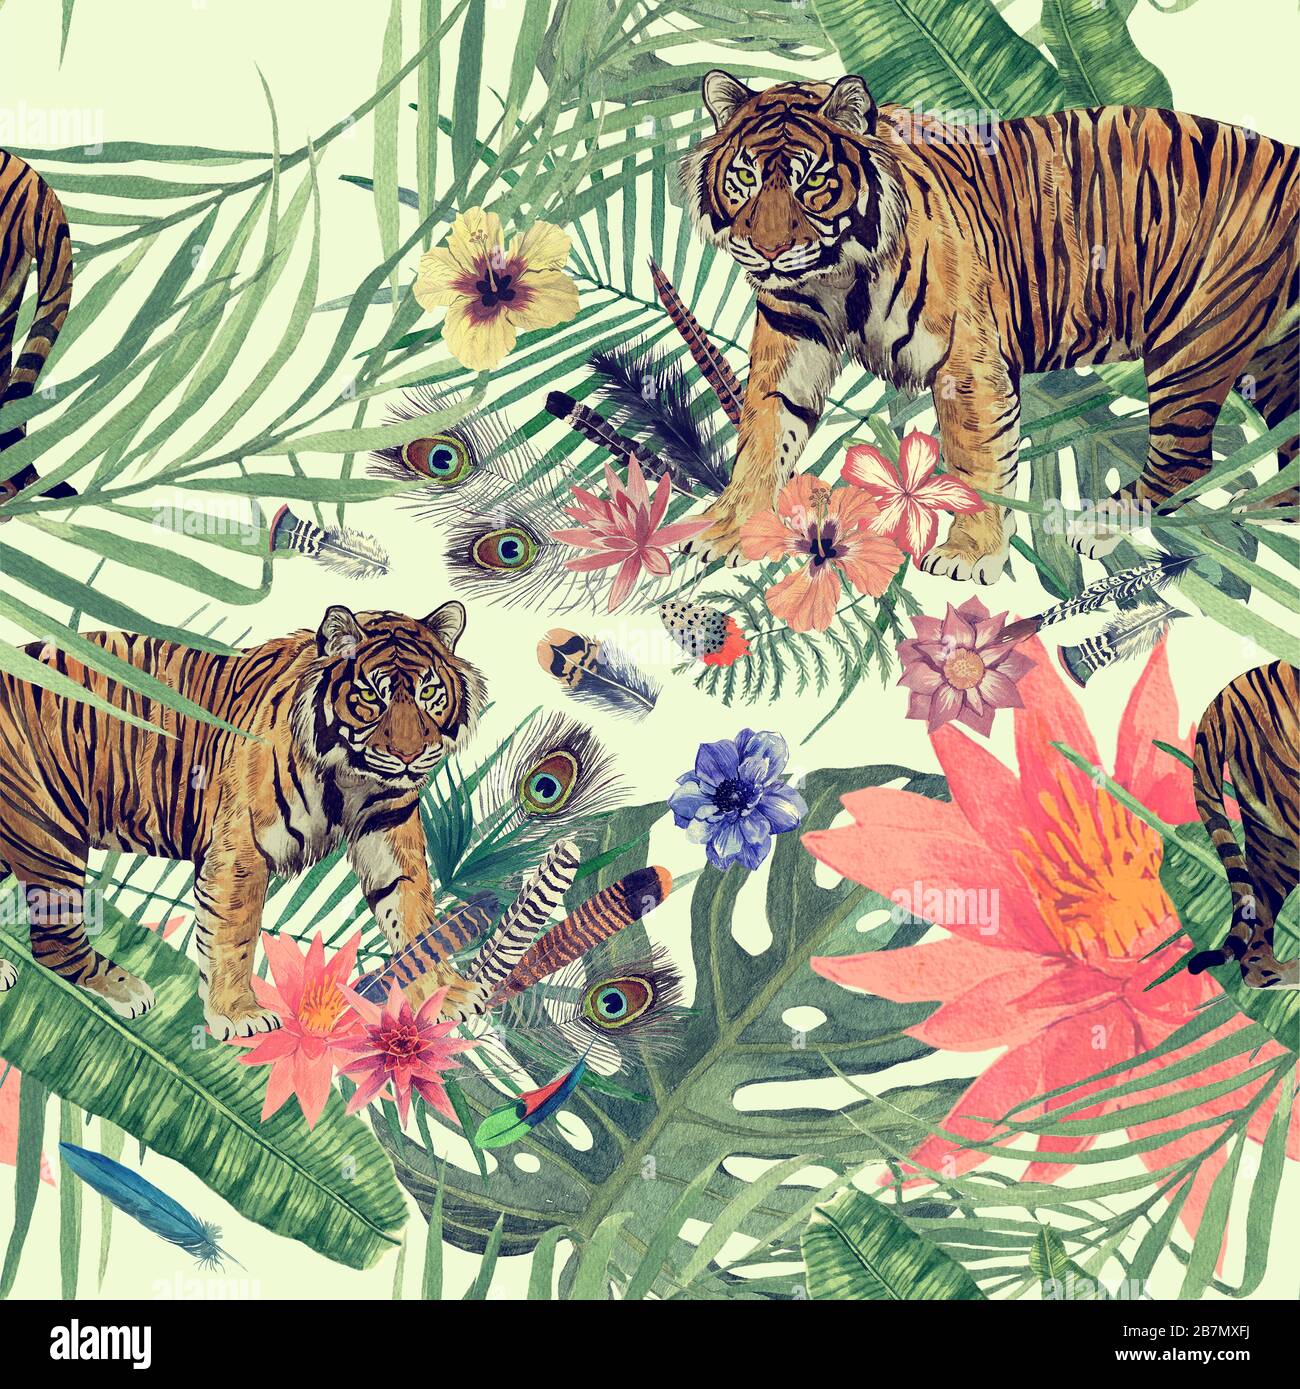 Seamles hand drawn watercolor pattern with tiger, leaves, feathers, flowers. Stock Photo